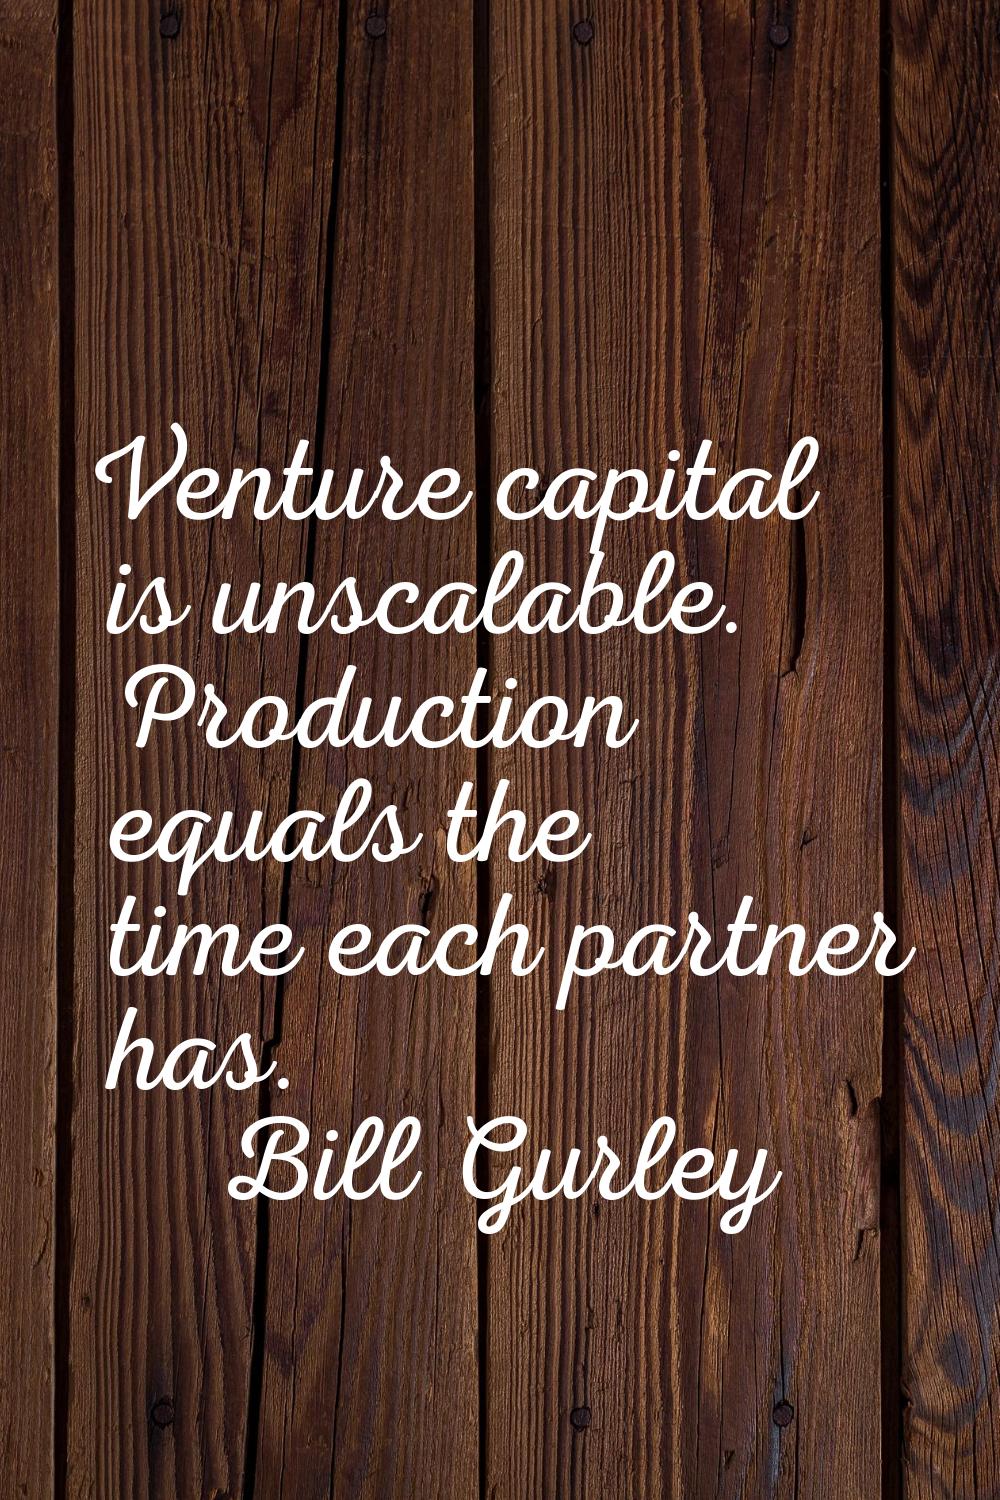 Venture capital is unscalable. Production equals the time each partner has.